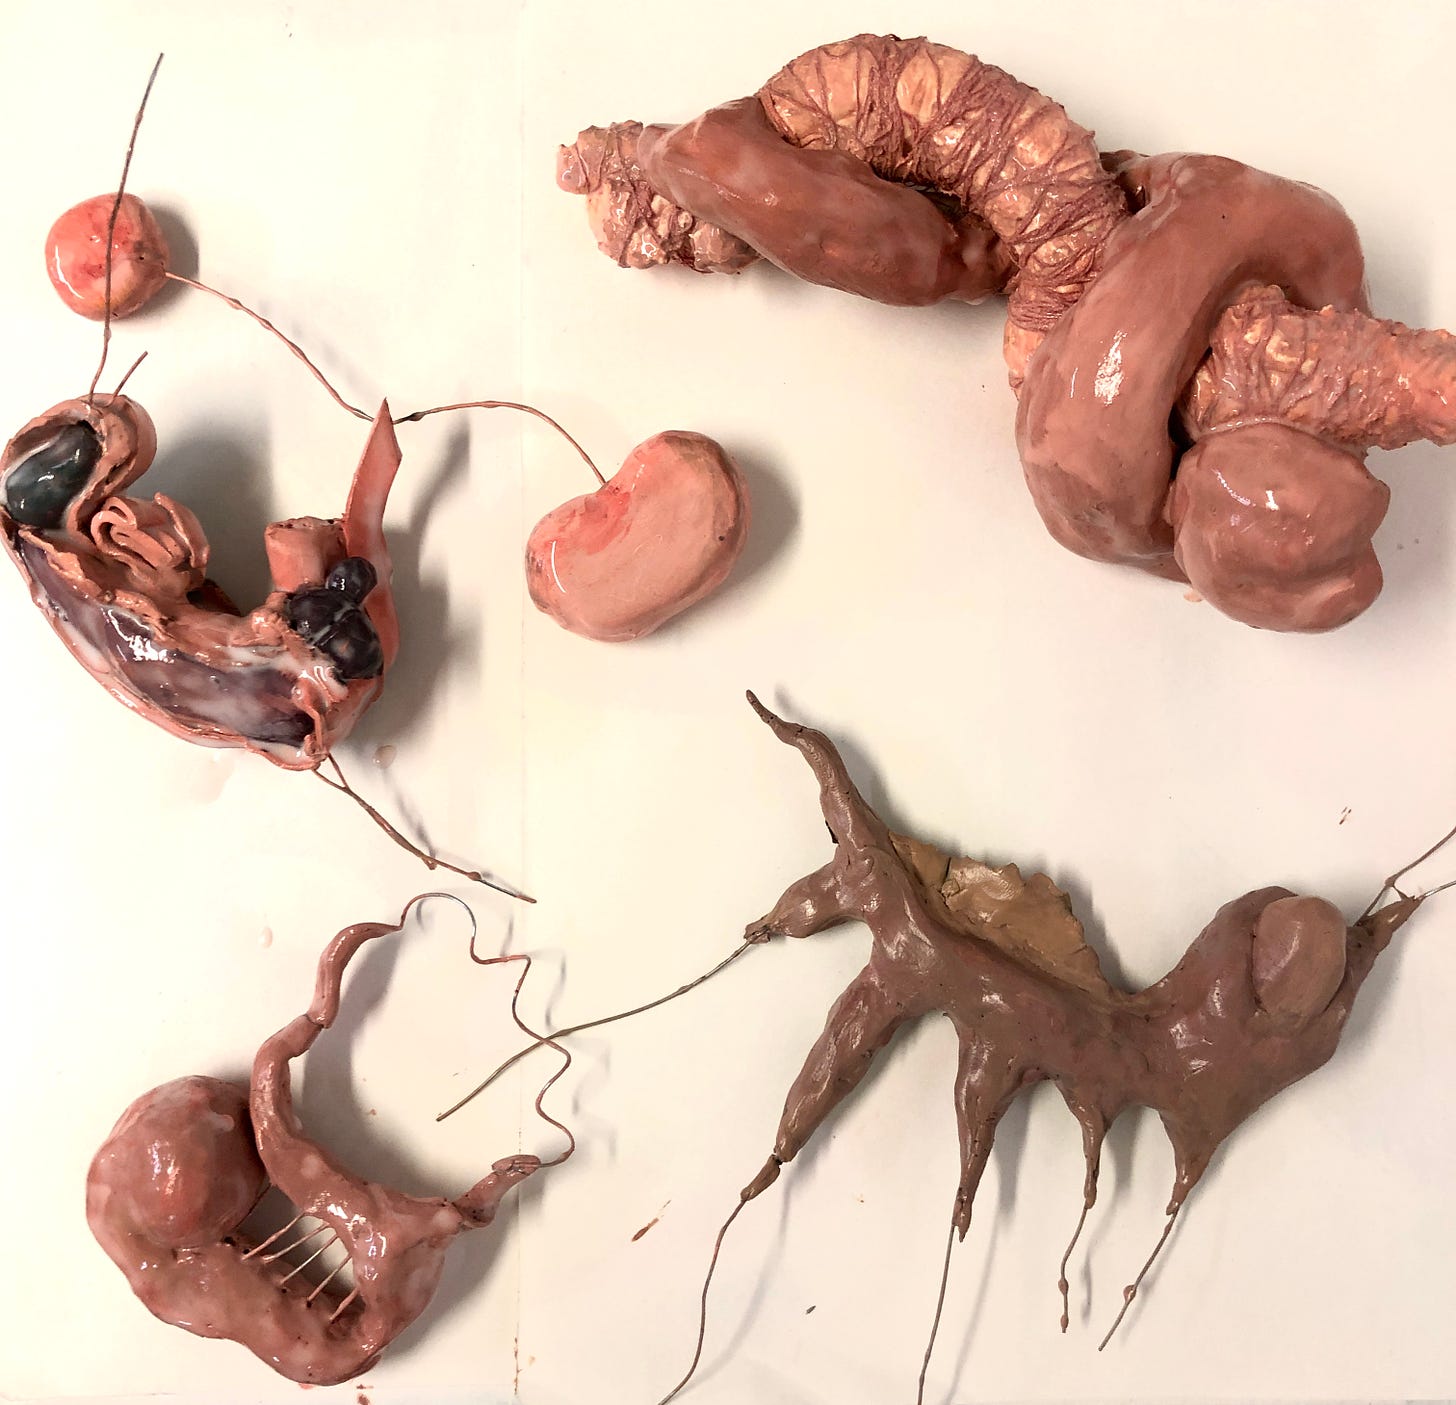 A selection of fleshy organ-like sculptures against a white background